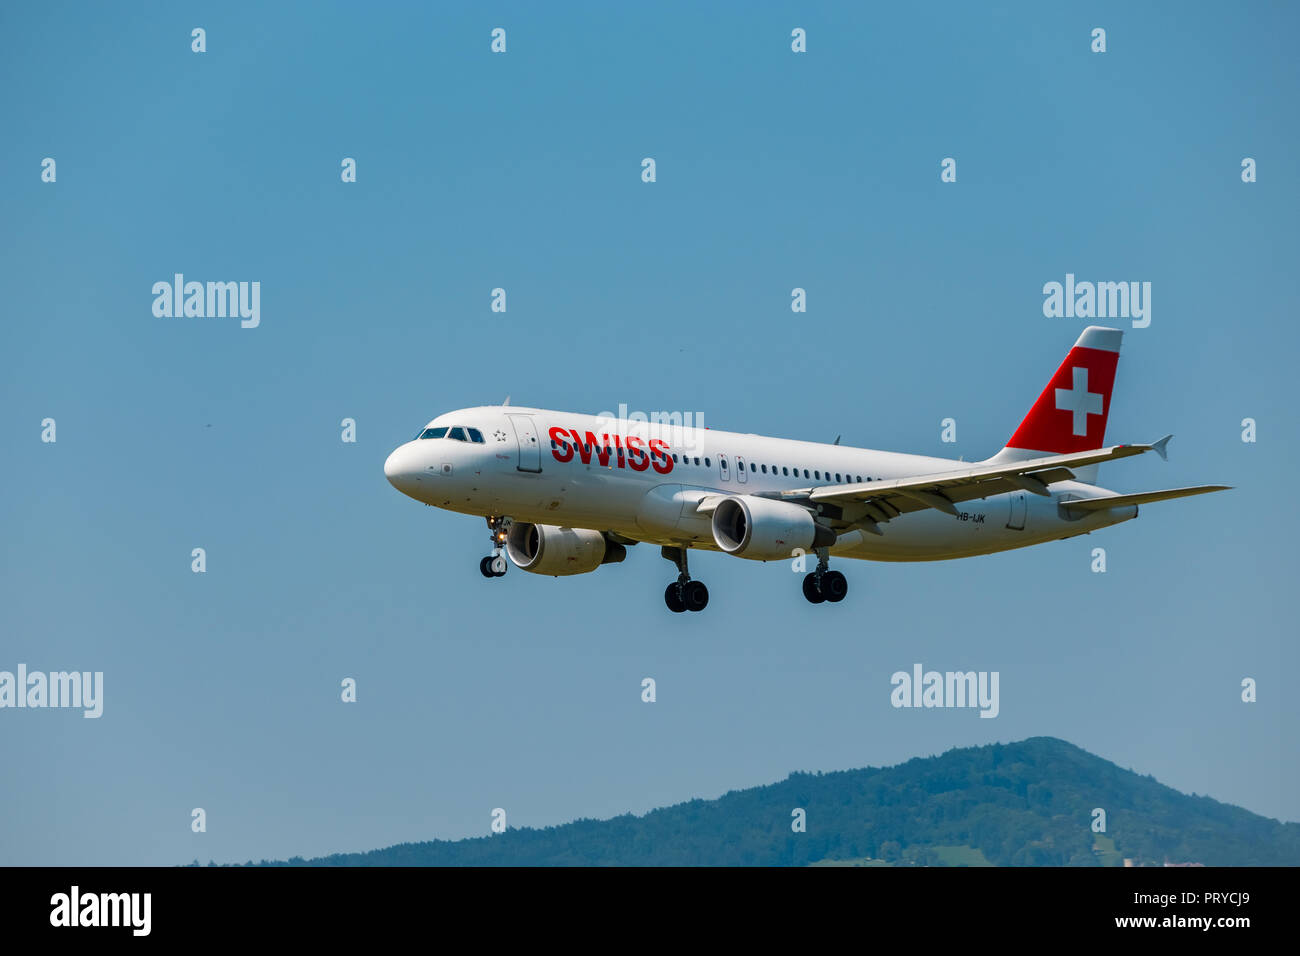 Swiss airlines airplane preparing for landing at day time in international airport Stock Photo